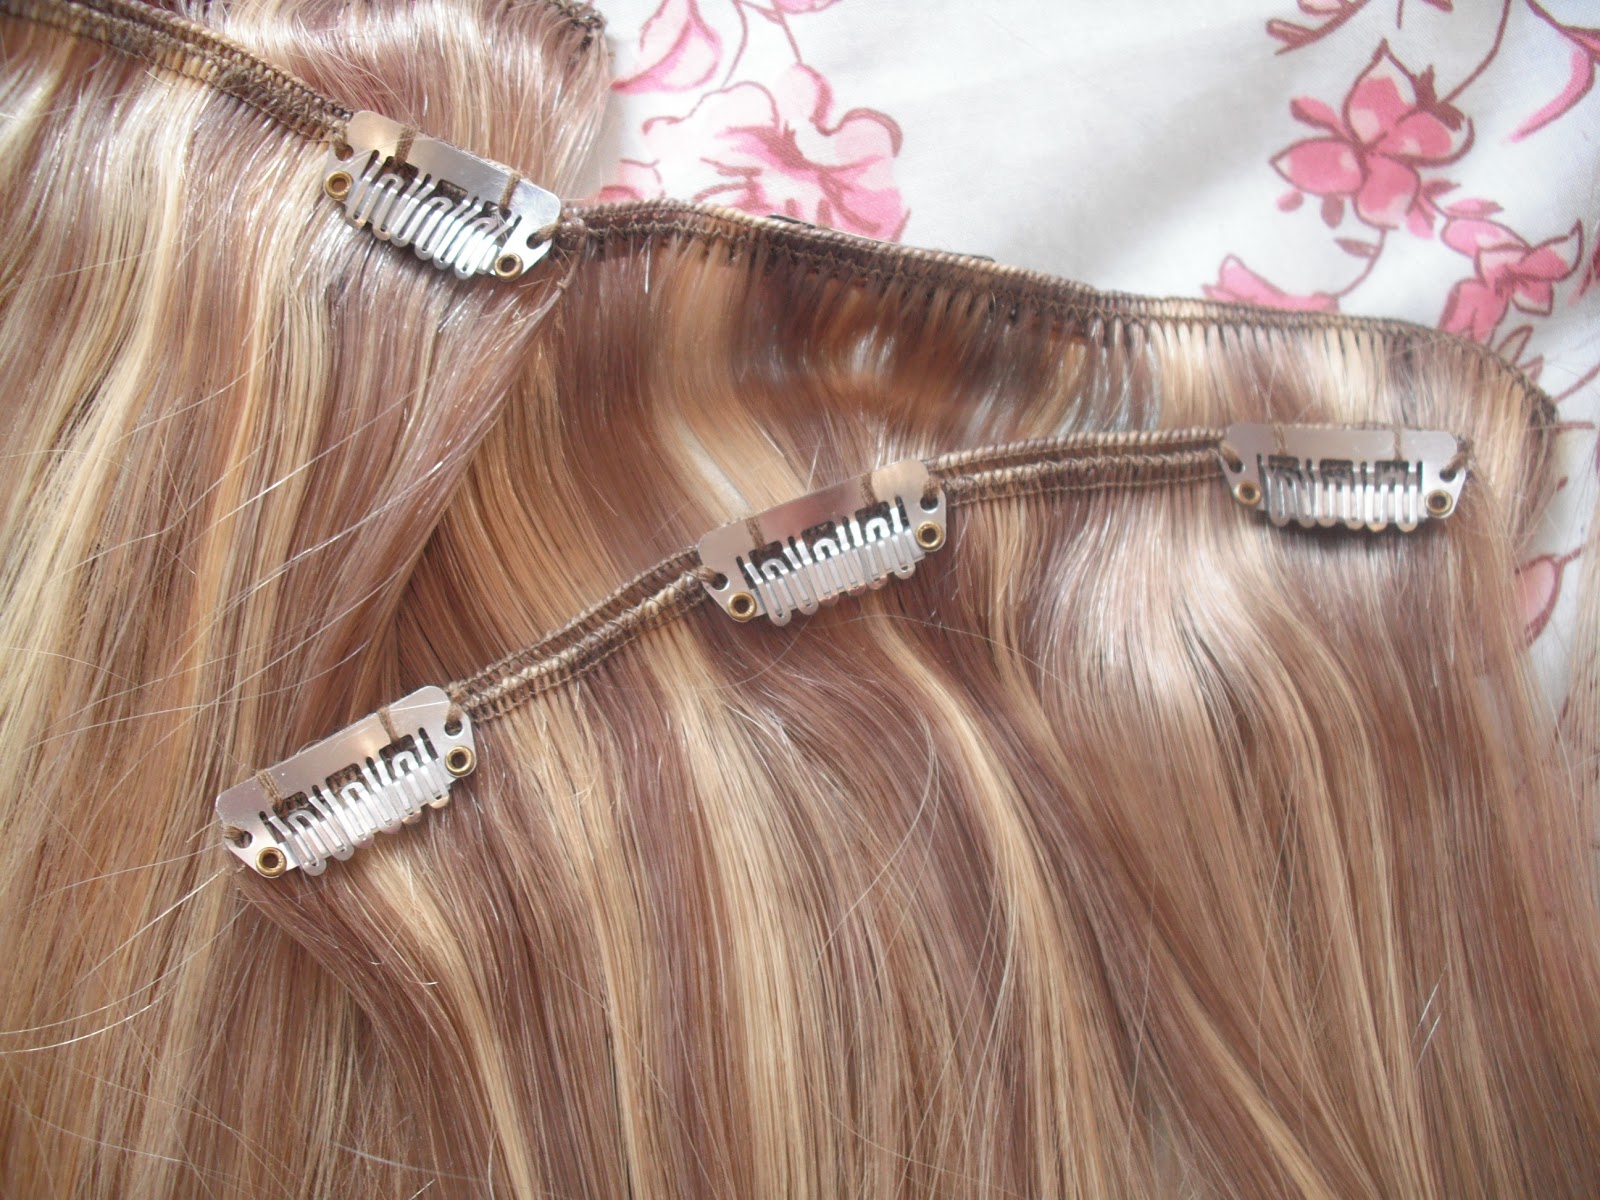 Electric Blue Clip In Hair Extensions - Etsy - wide 7